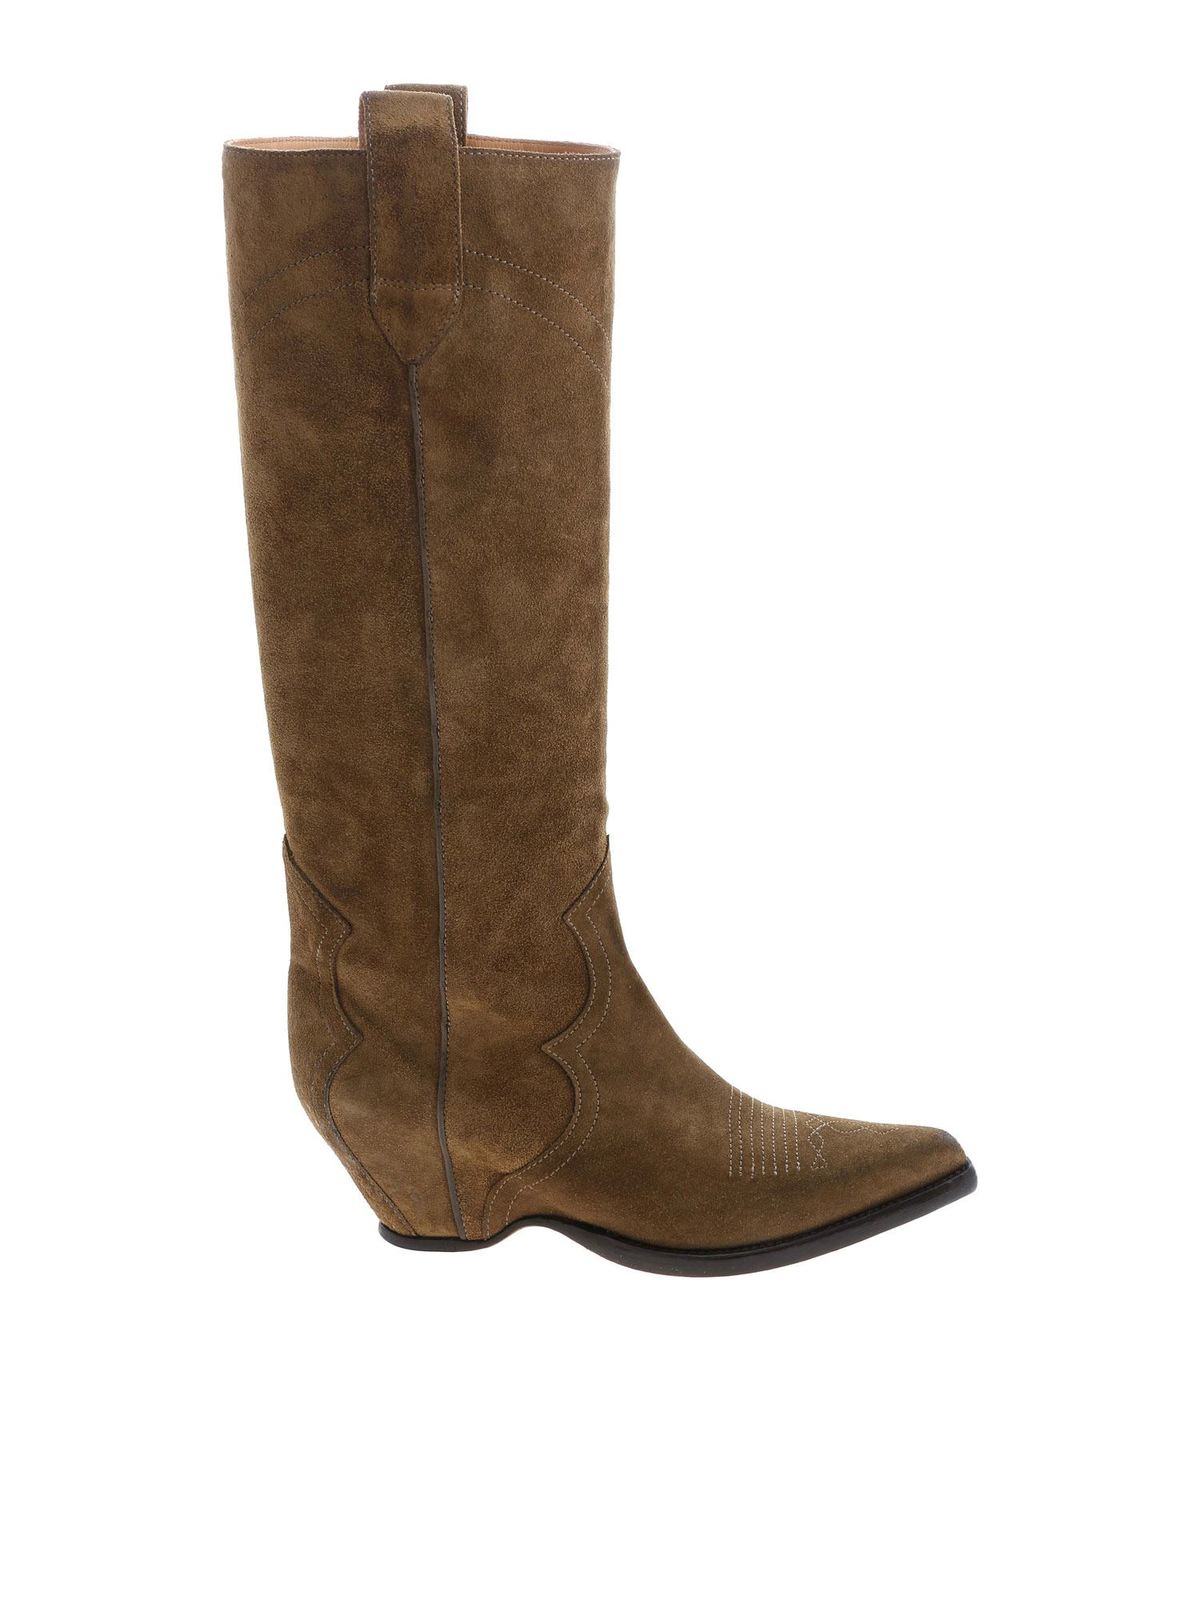 vlees Zwitsers Centraliseren Boots Maison Margiela - Sendra boots in brown - S58WW0143P3703T7425